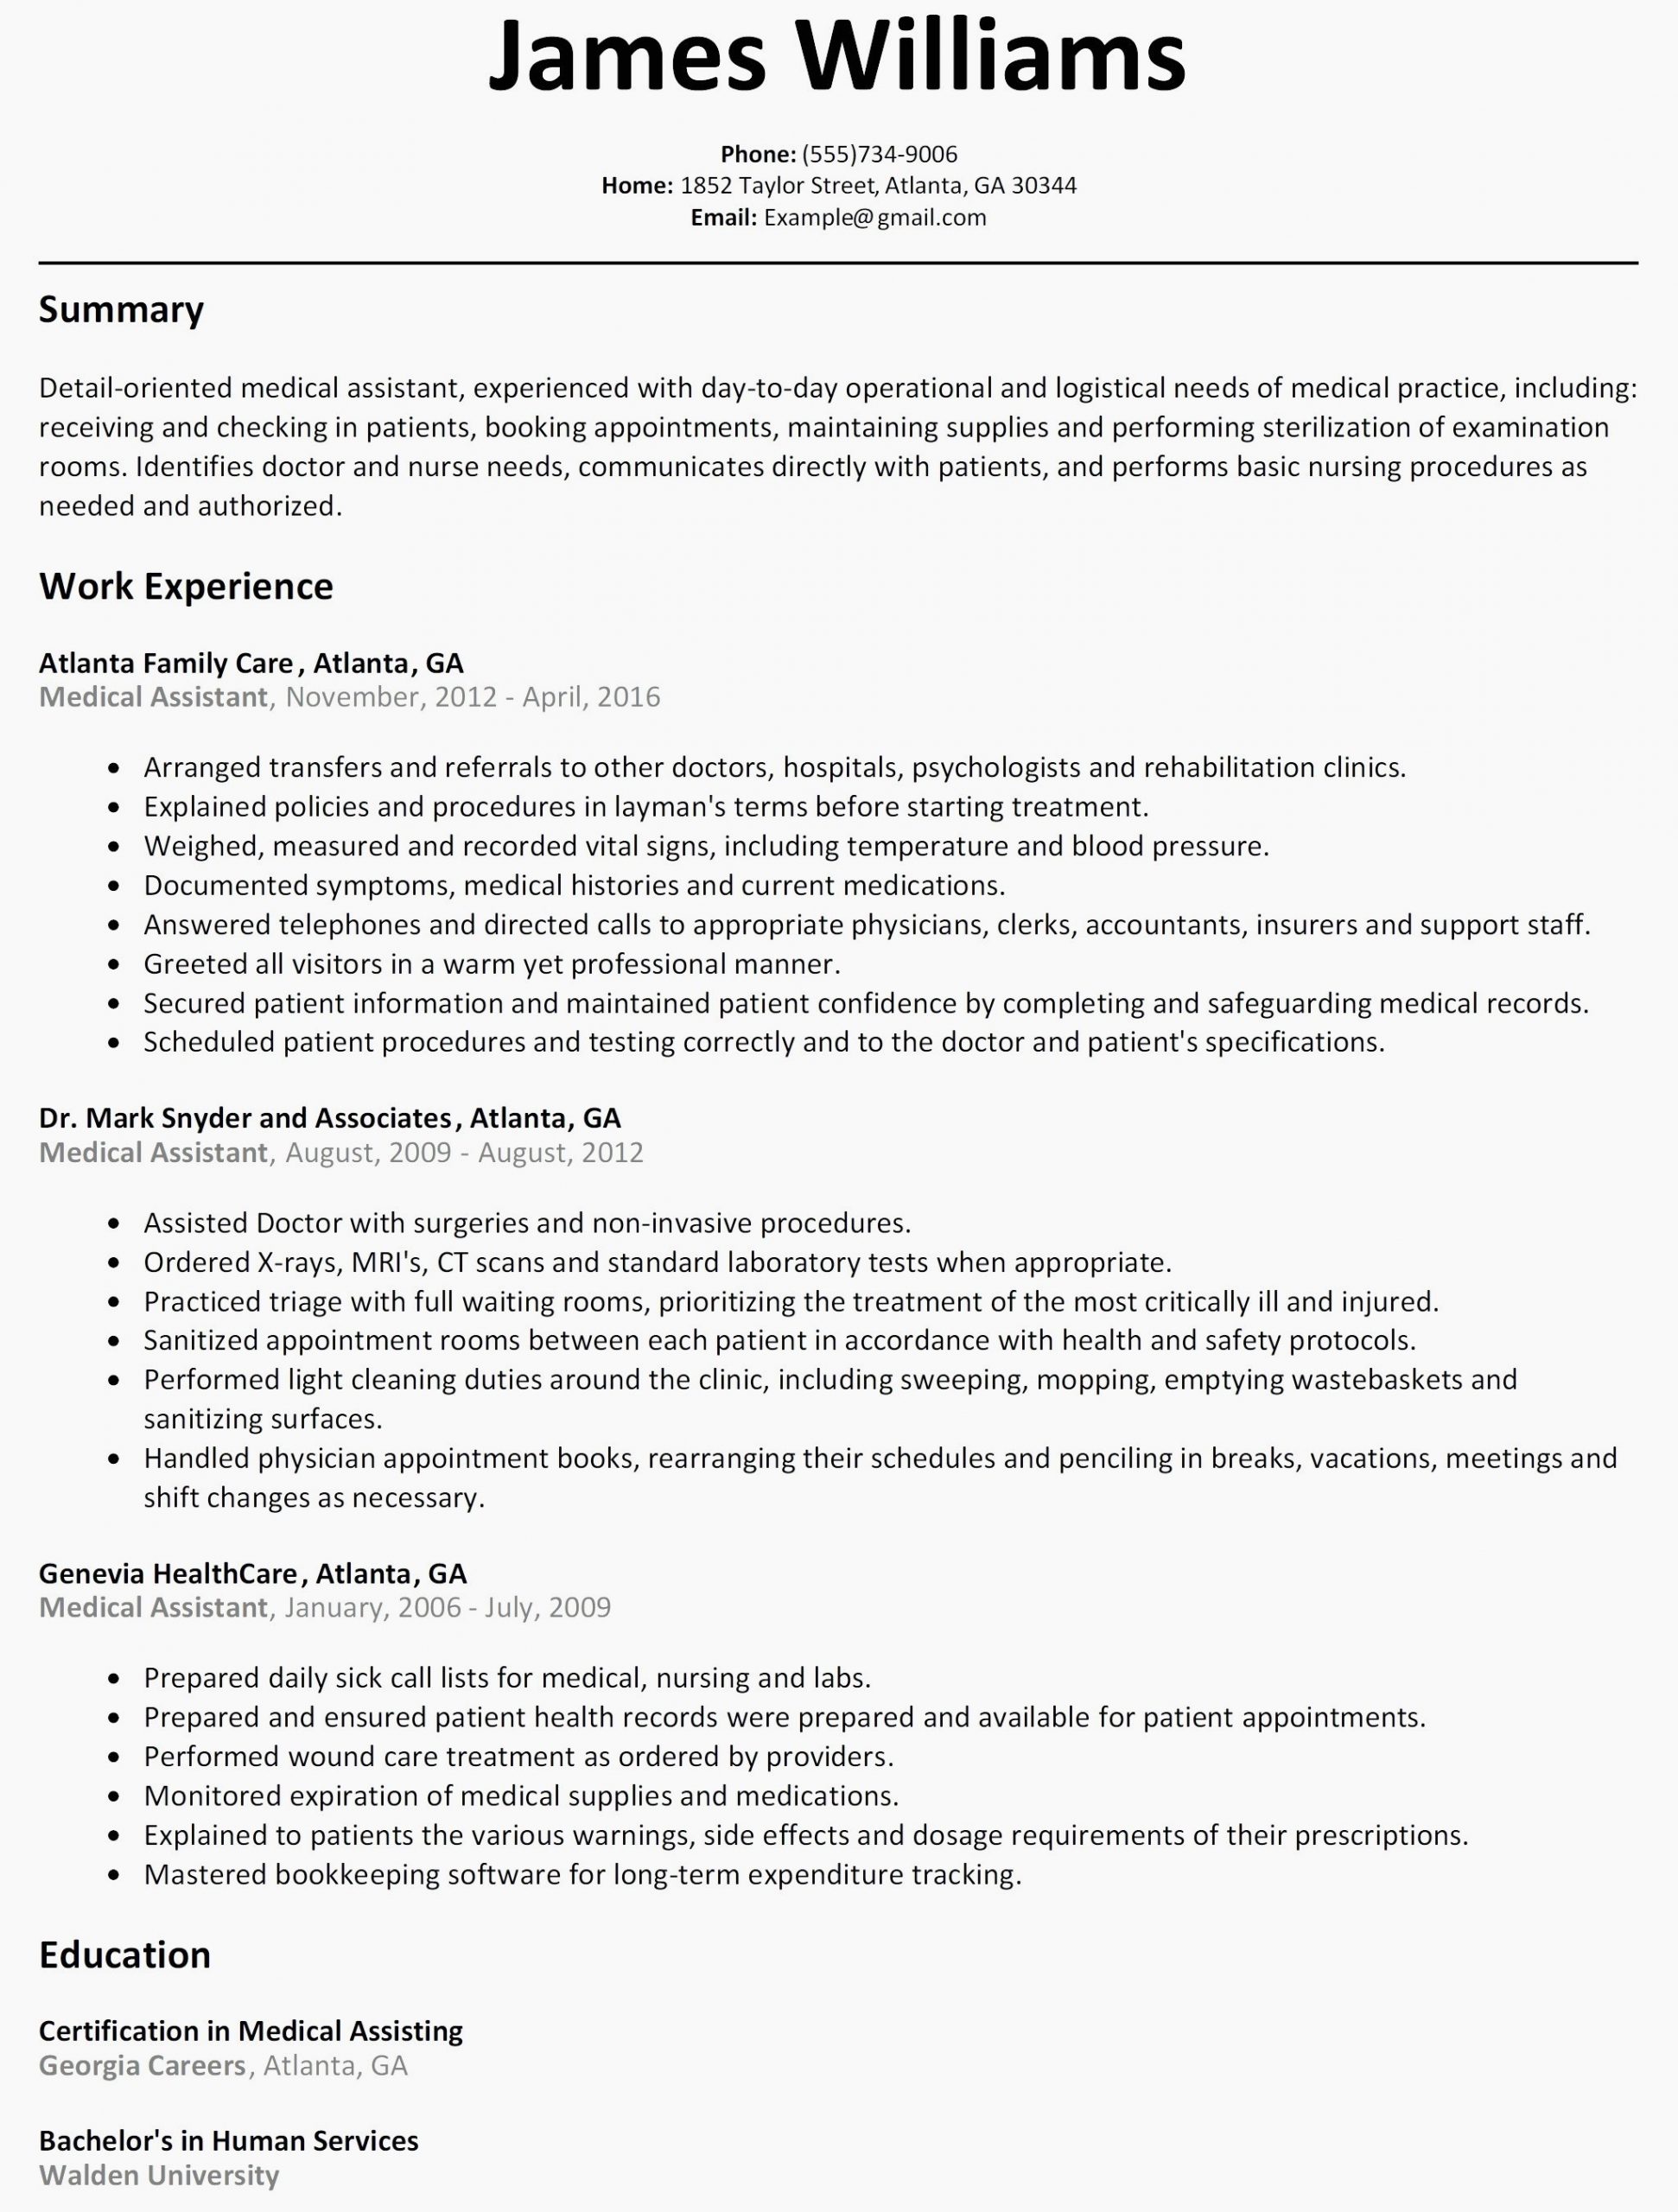 Sample Resume for Housewife Returning to Work Housewife Resume Sample October 2021